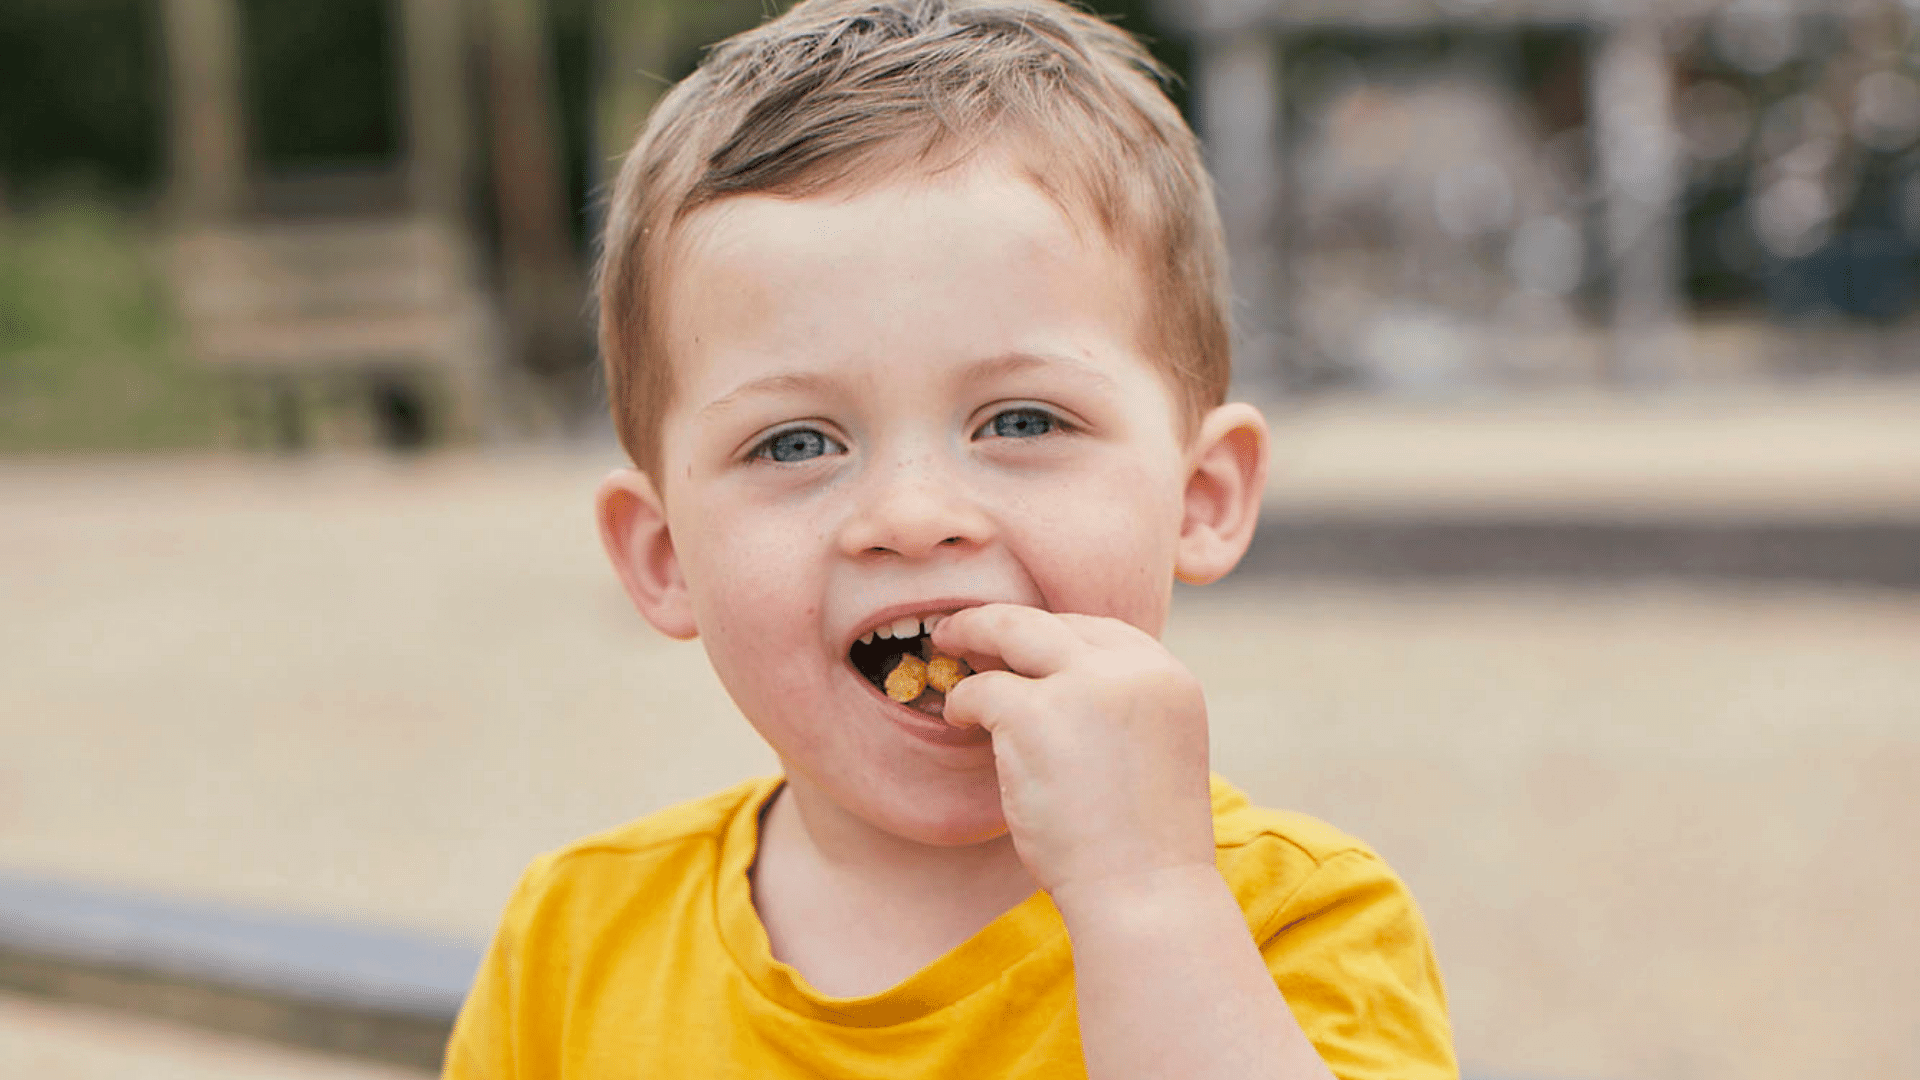 Toddler at the park wearing a yellow t-shirt and eating an Organix Toddler snack